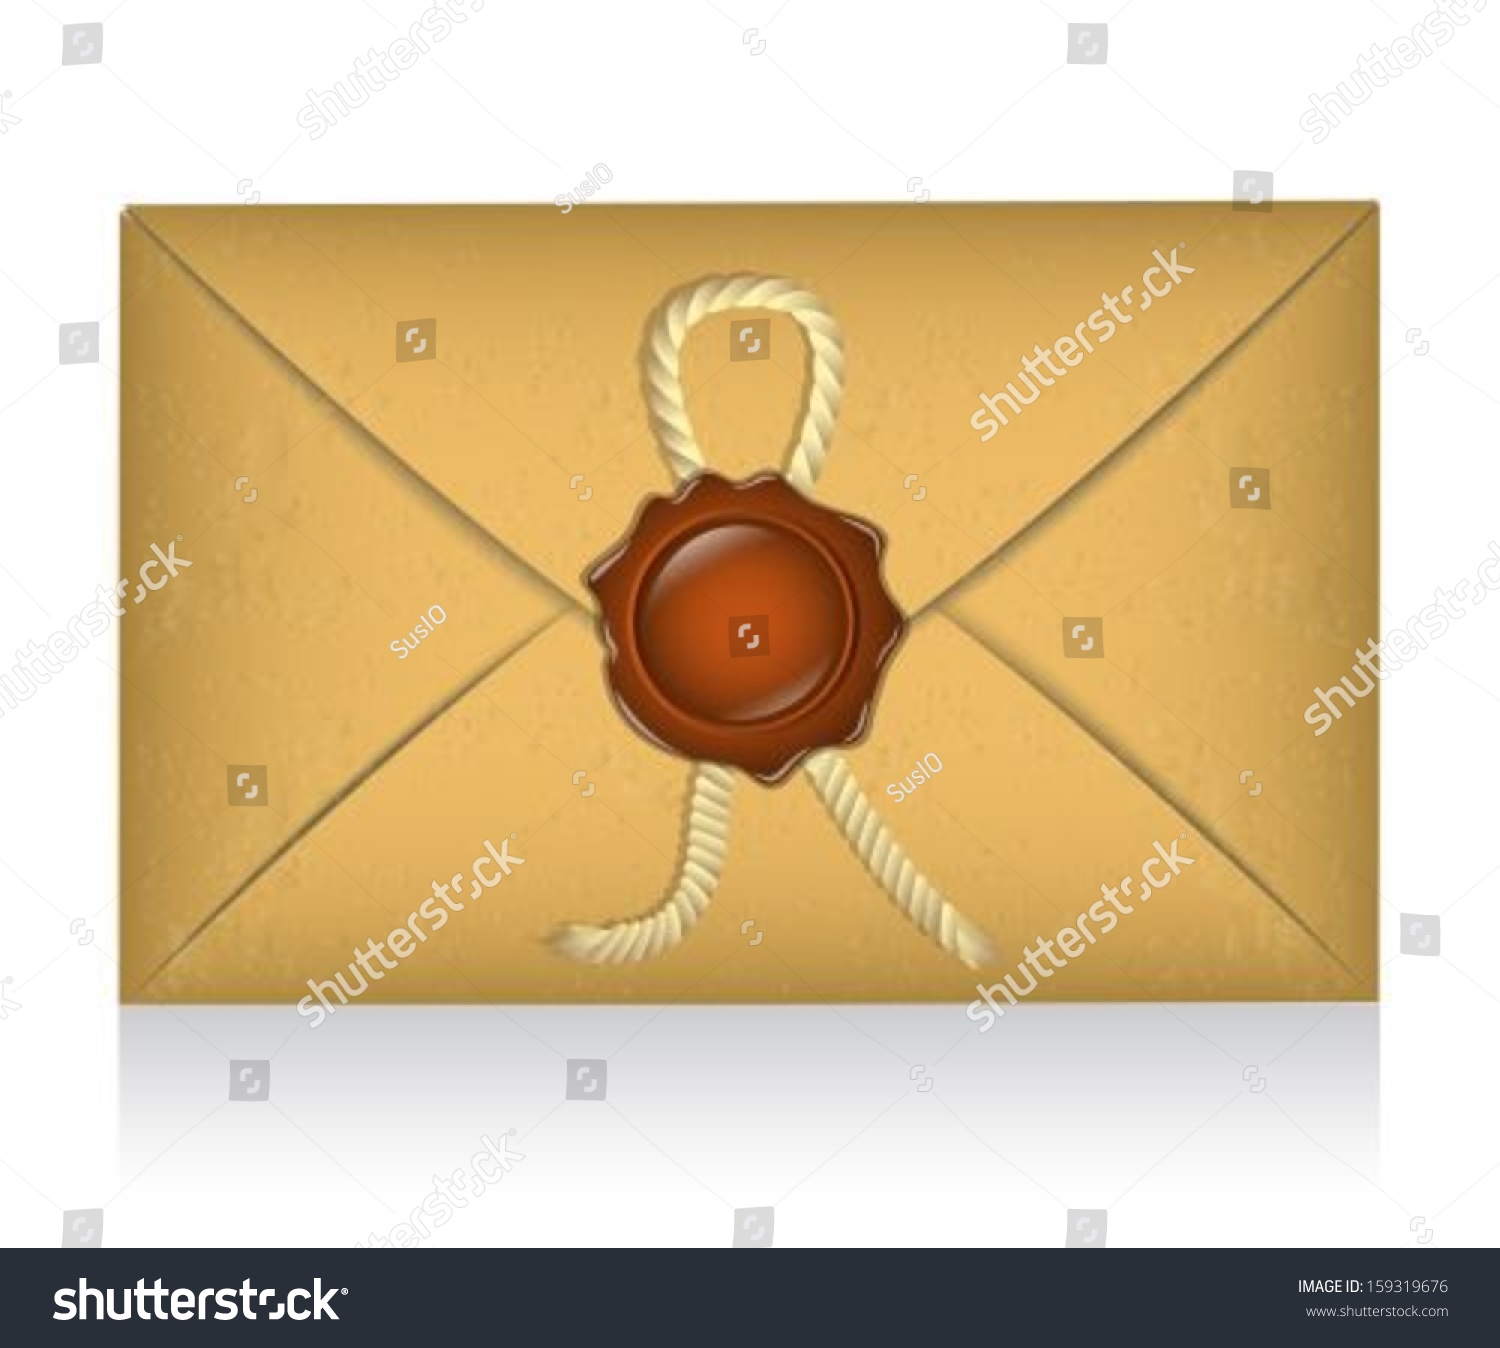 Sealed Envelope Sealing Wax Rope Vintage Objects Stock Image